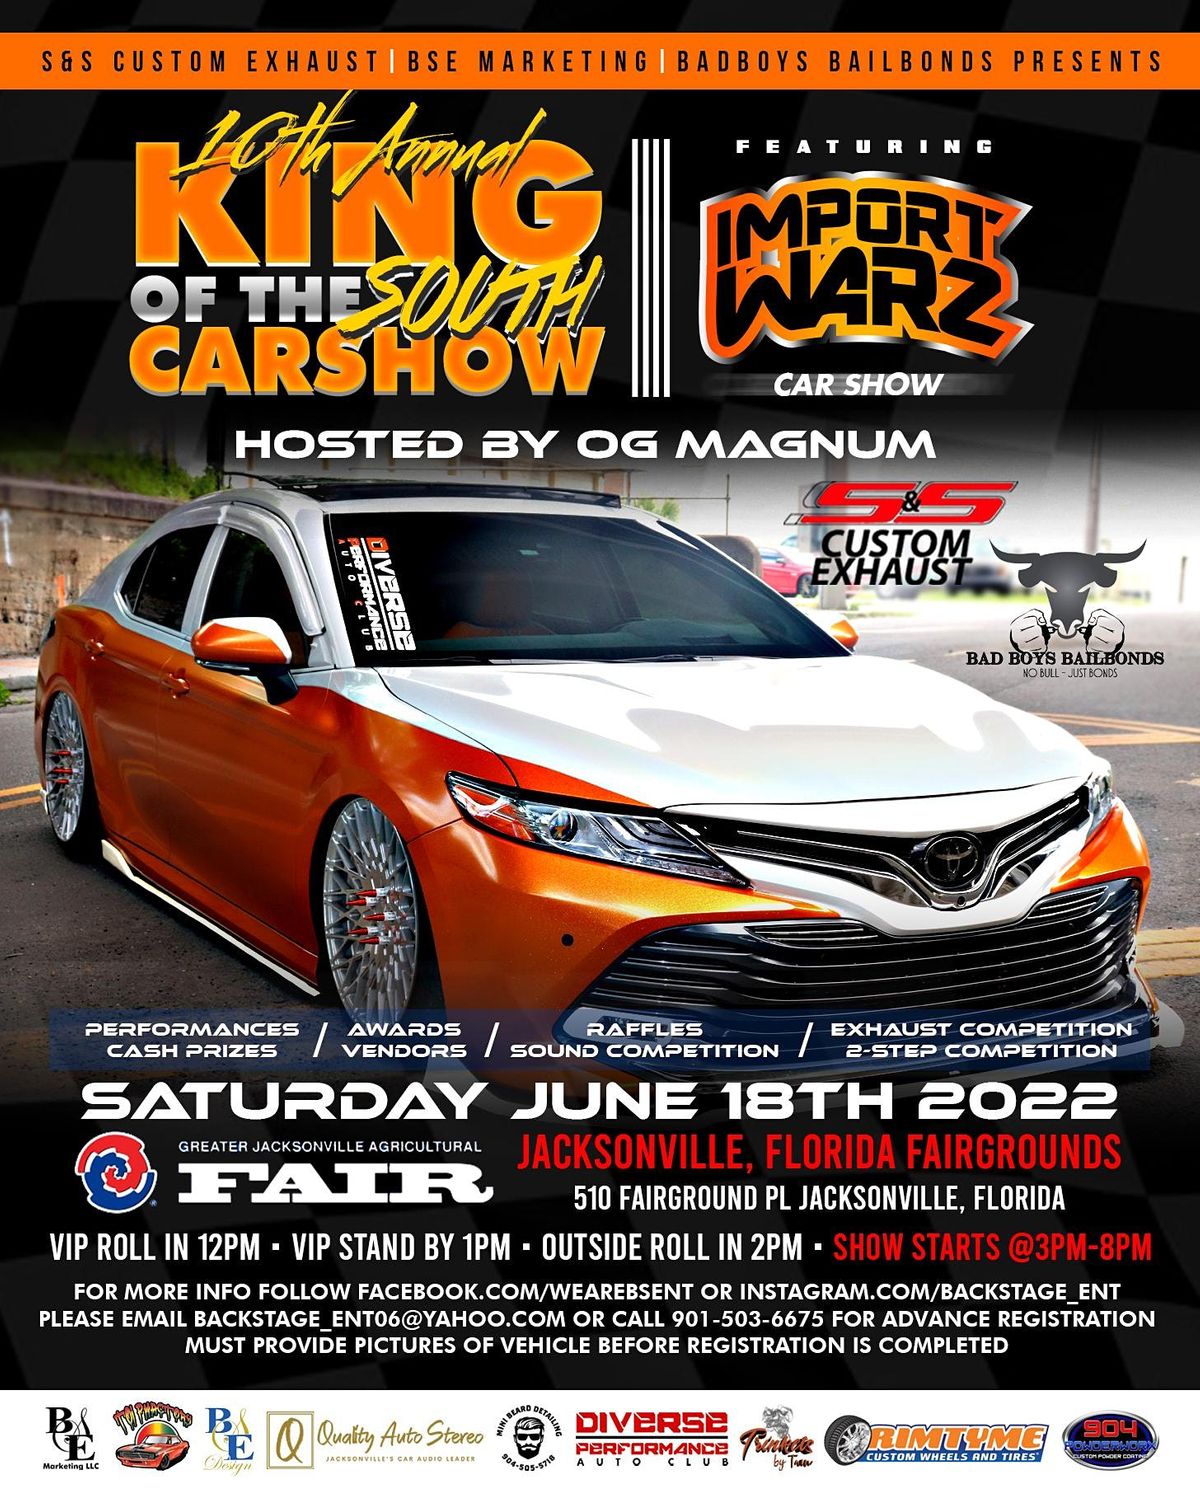 10TH ANNUAL KING OF THE SOUTH FEATURING IMPORT WARZ